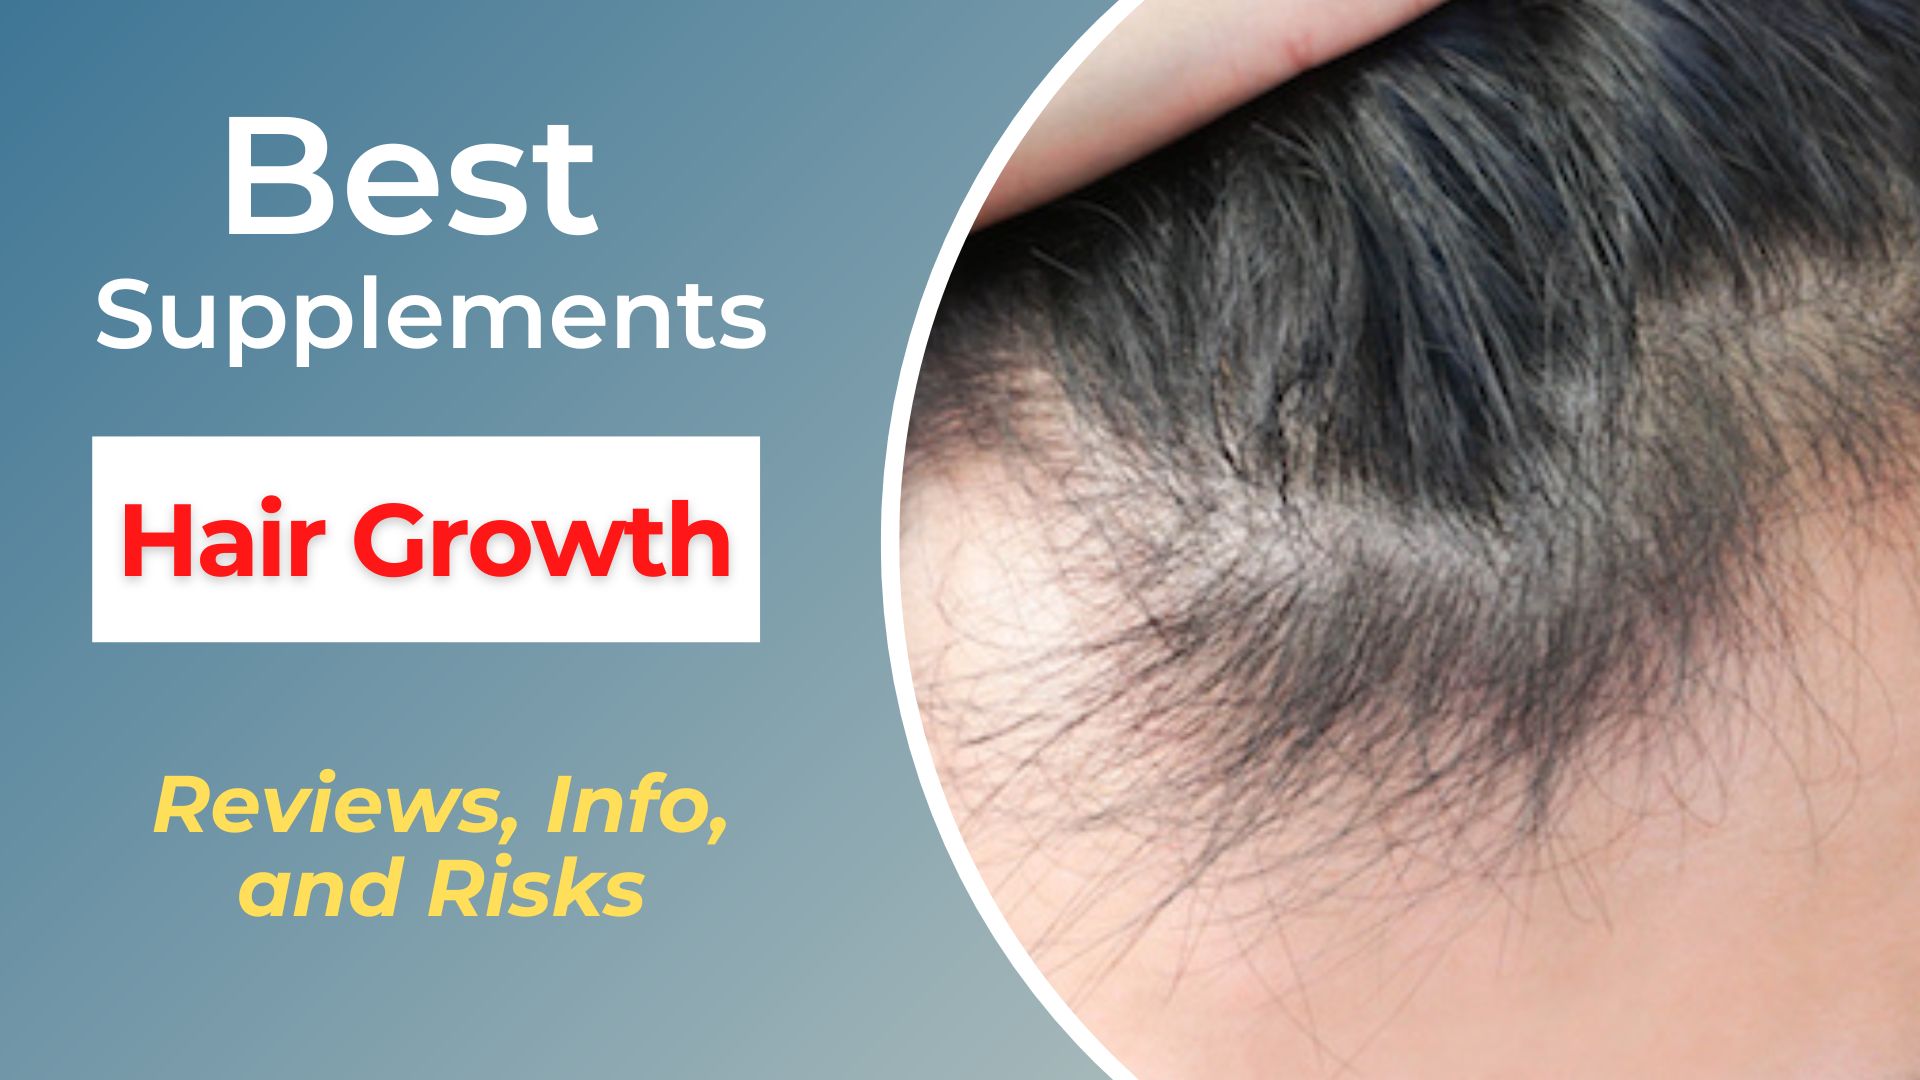 Best Supplements for Hair Growth